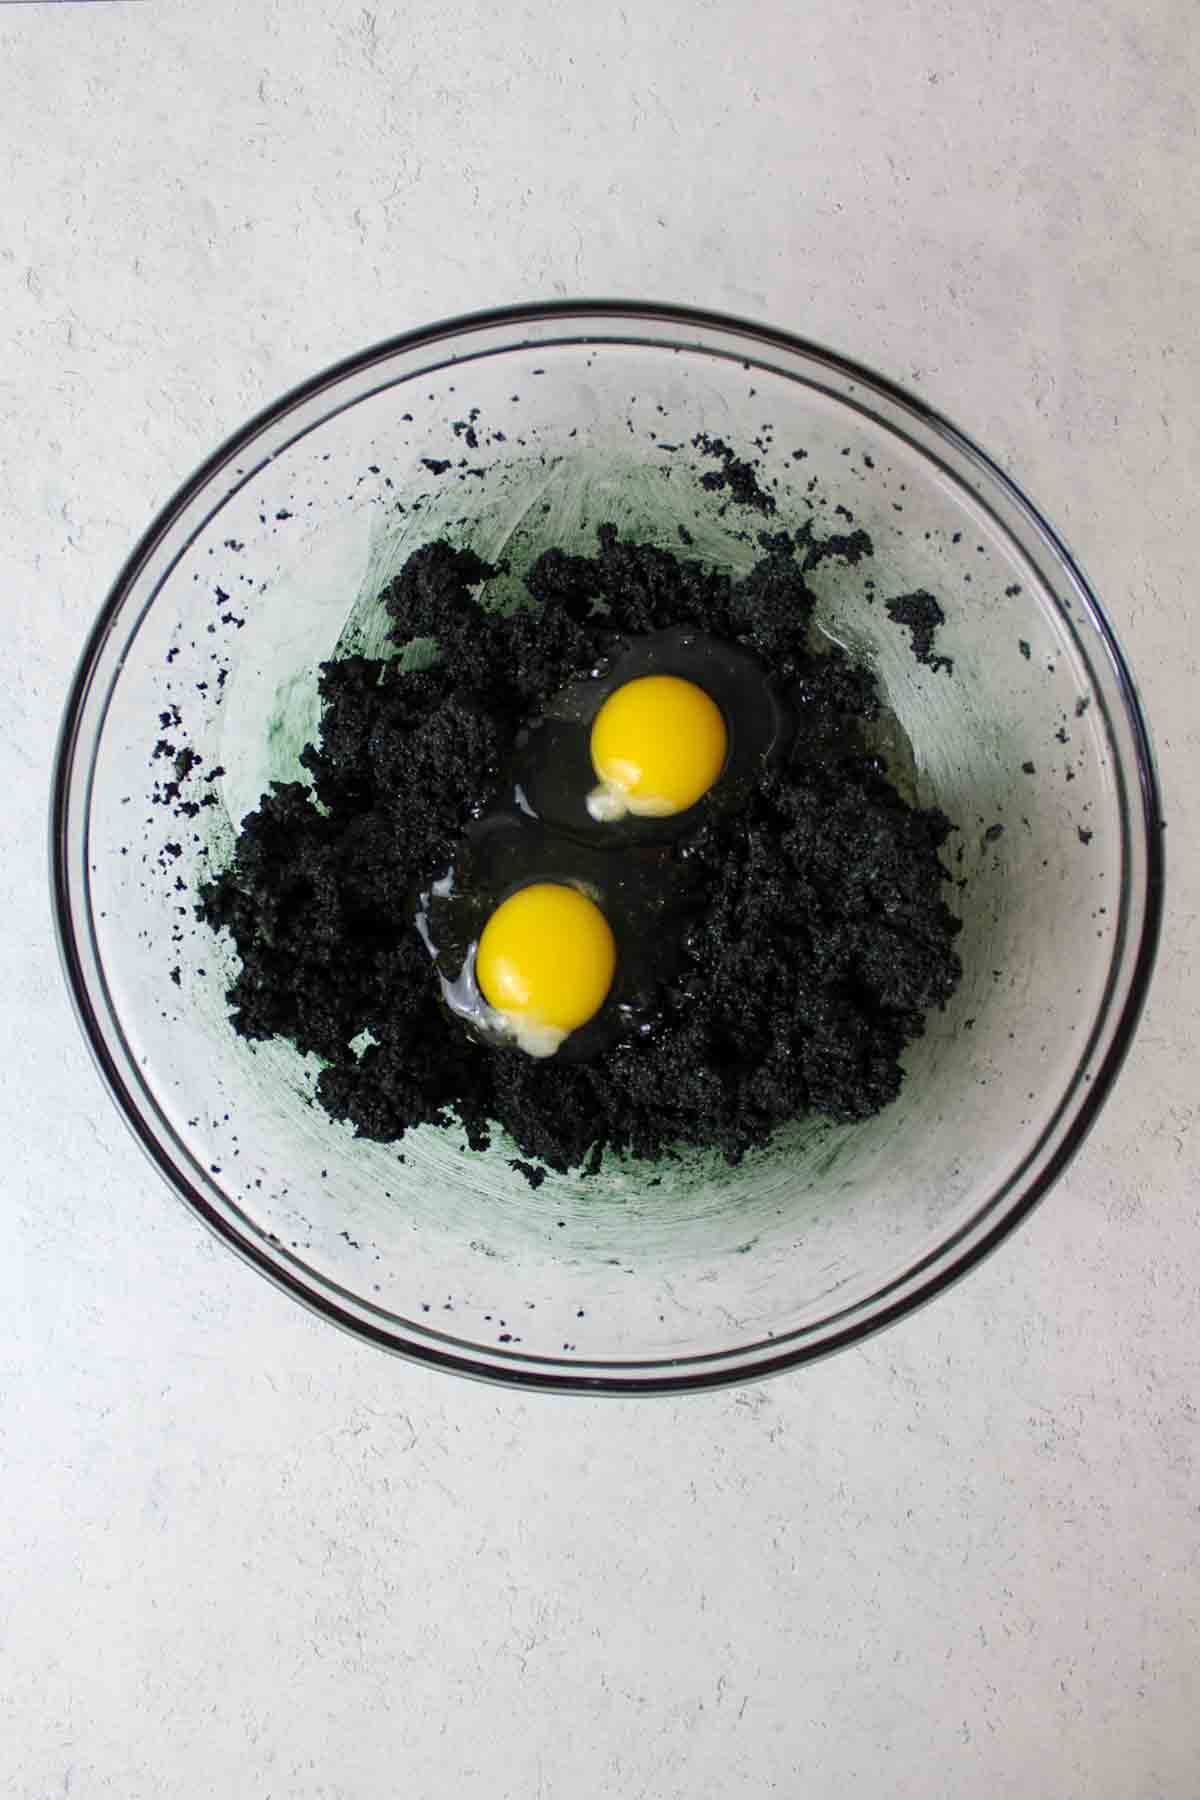 two eggs added to the black butter and sugar mixture.